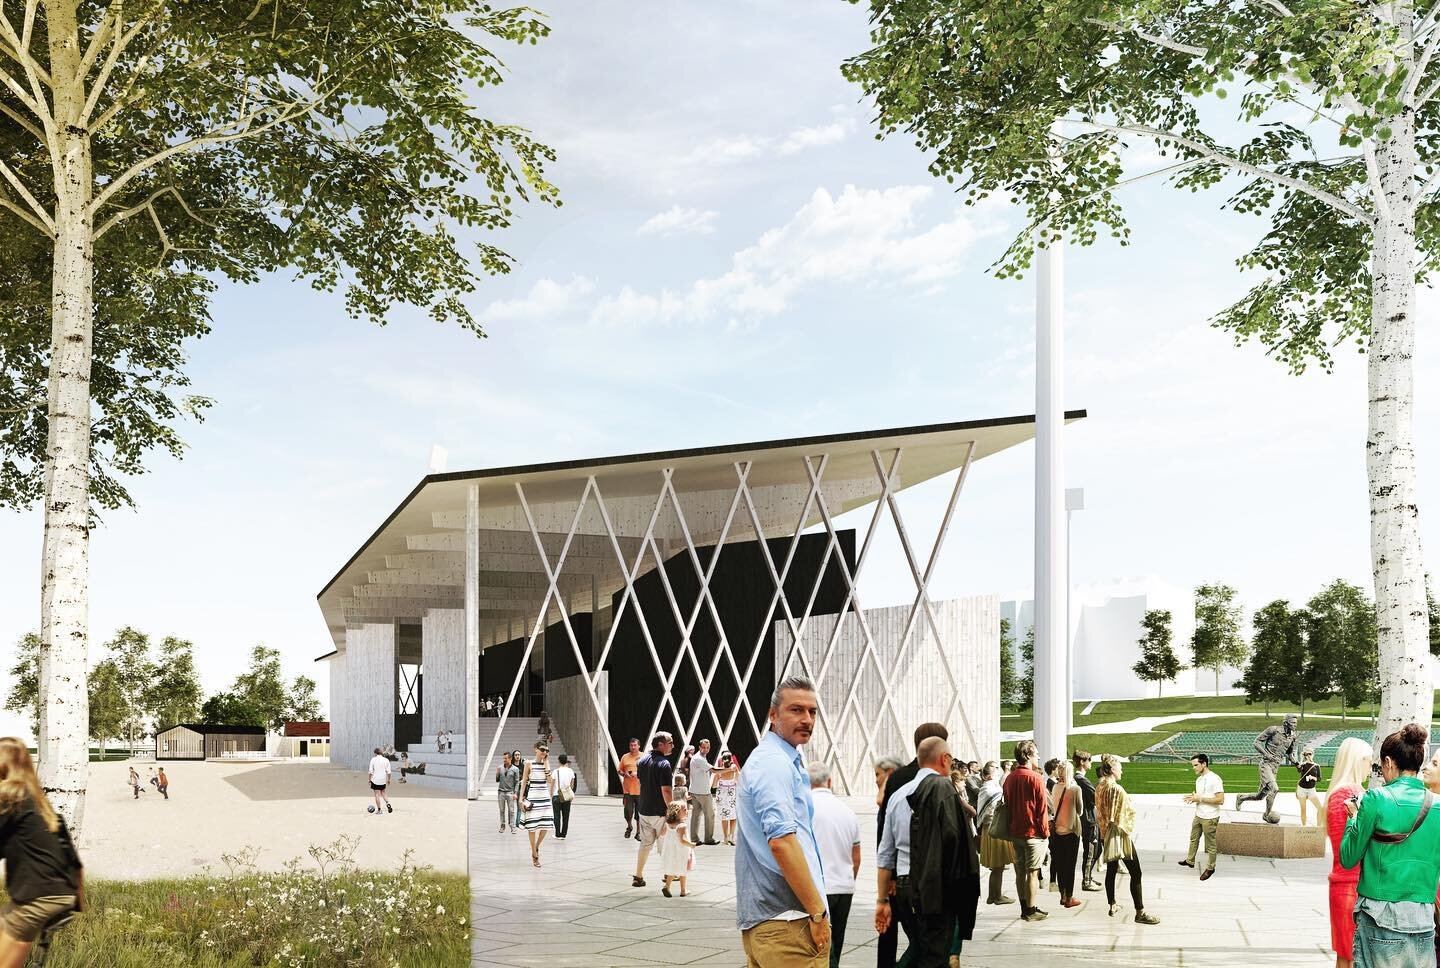 This is how the new timber main stand for football stadium in Lahti would look like! 
#architecture #lahti #kisapuisto #architecturewood 
.
.
.
#perspective #holzbau #architecture_minimal #archiviz #architecturelovers #arquitectura #arkitektur #archi